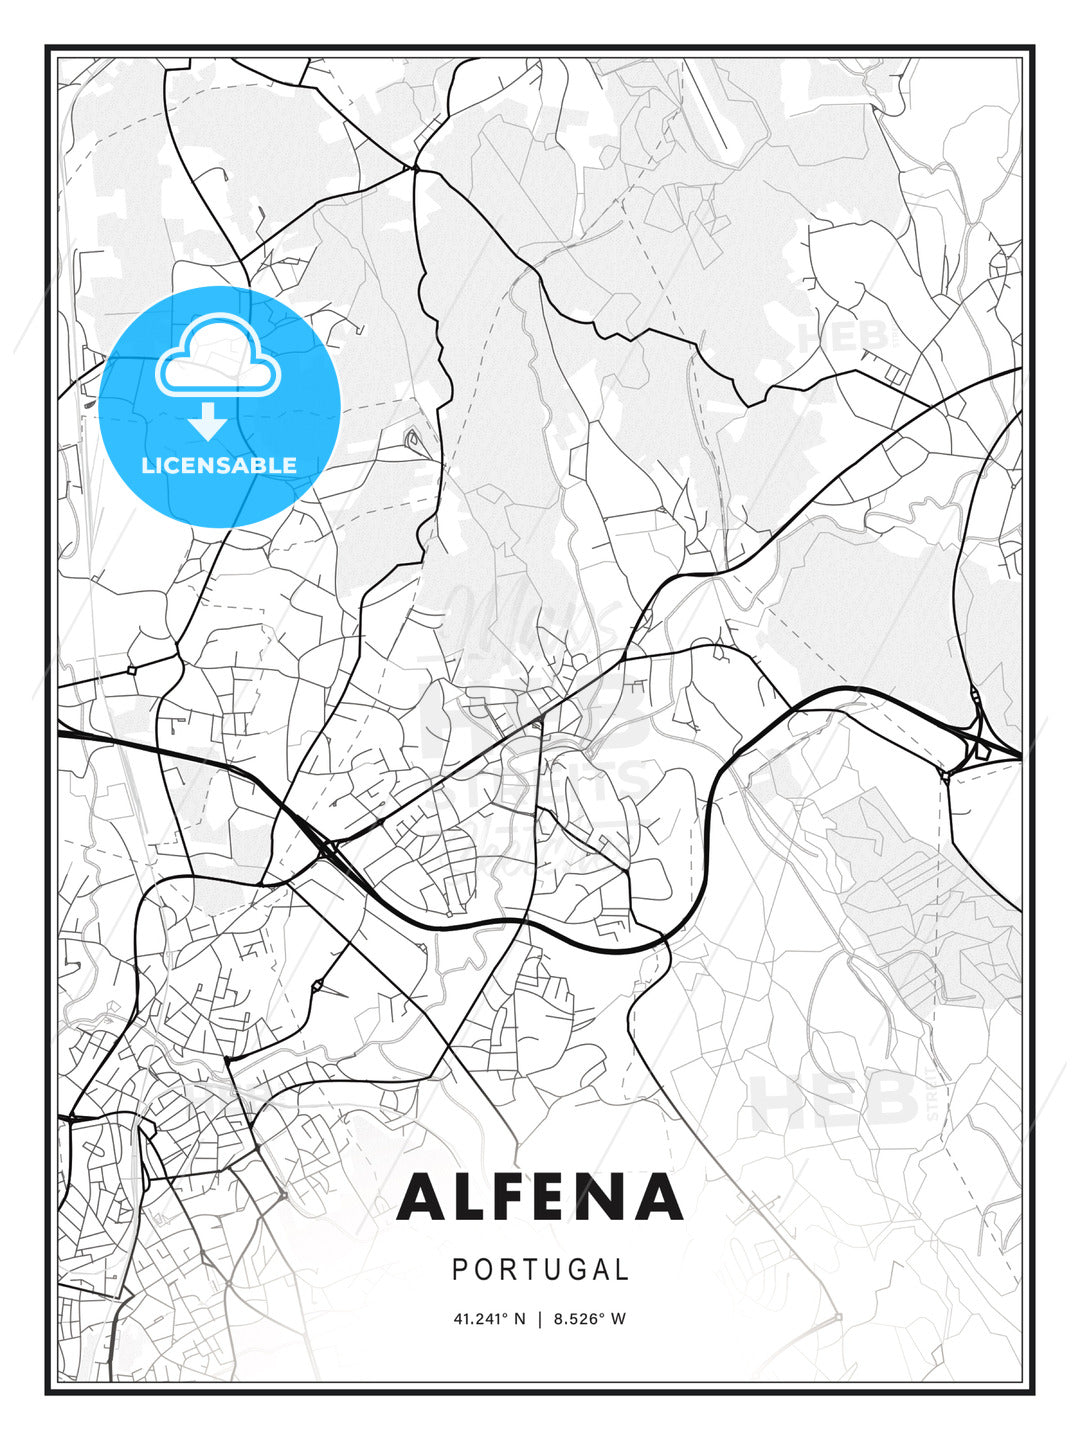 Alfena, Portugal, Modern Print Template in Various Formats - HEBSTREITS Sketches